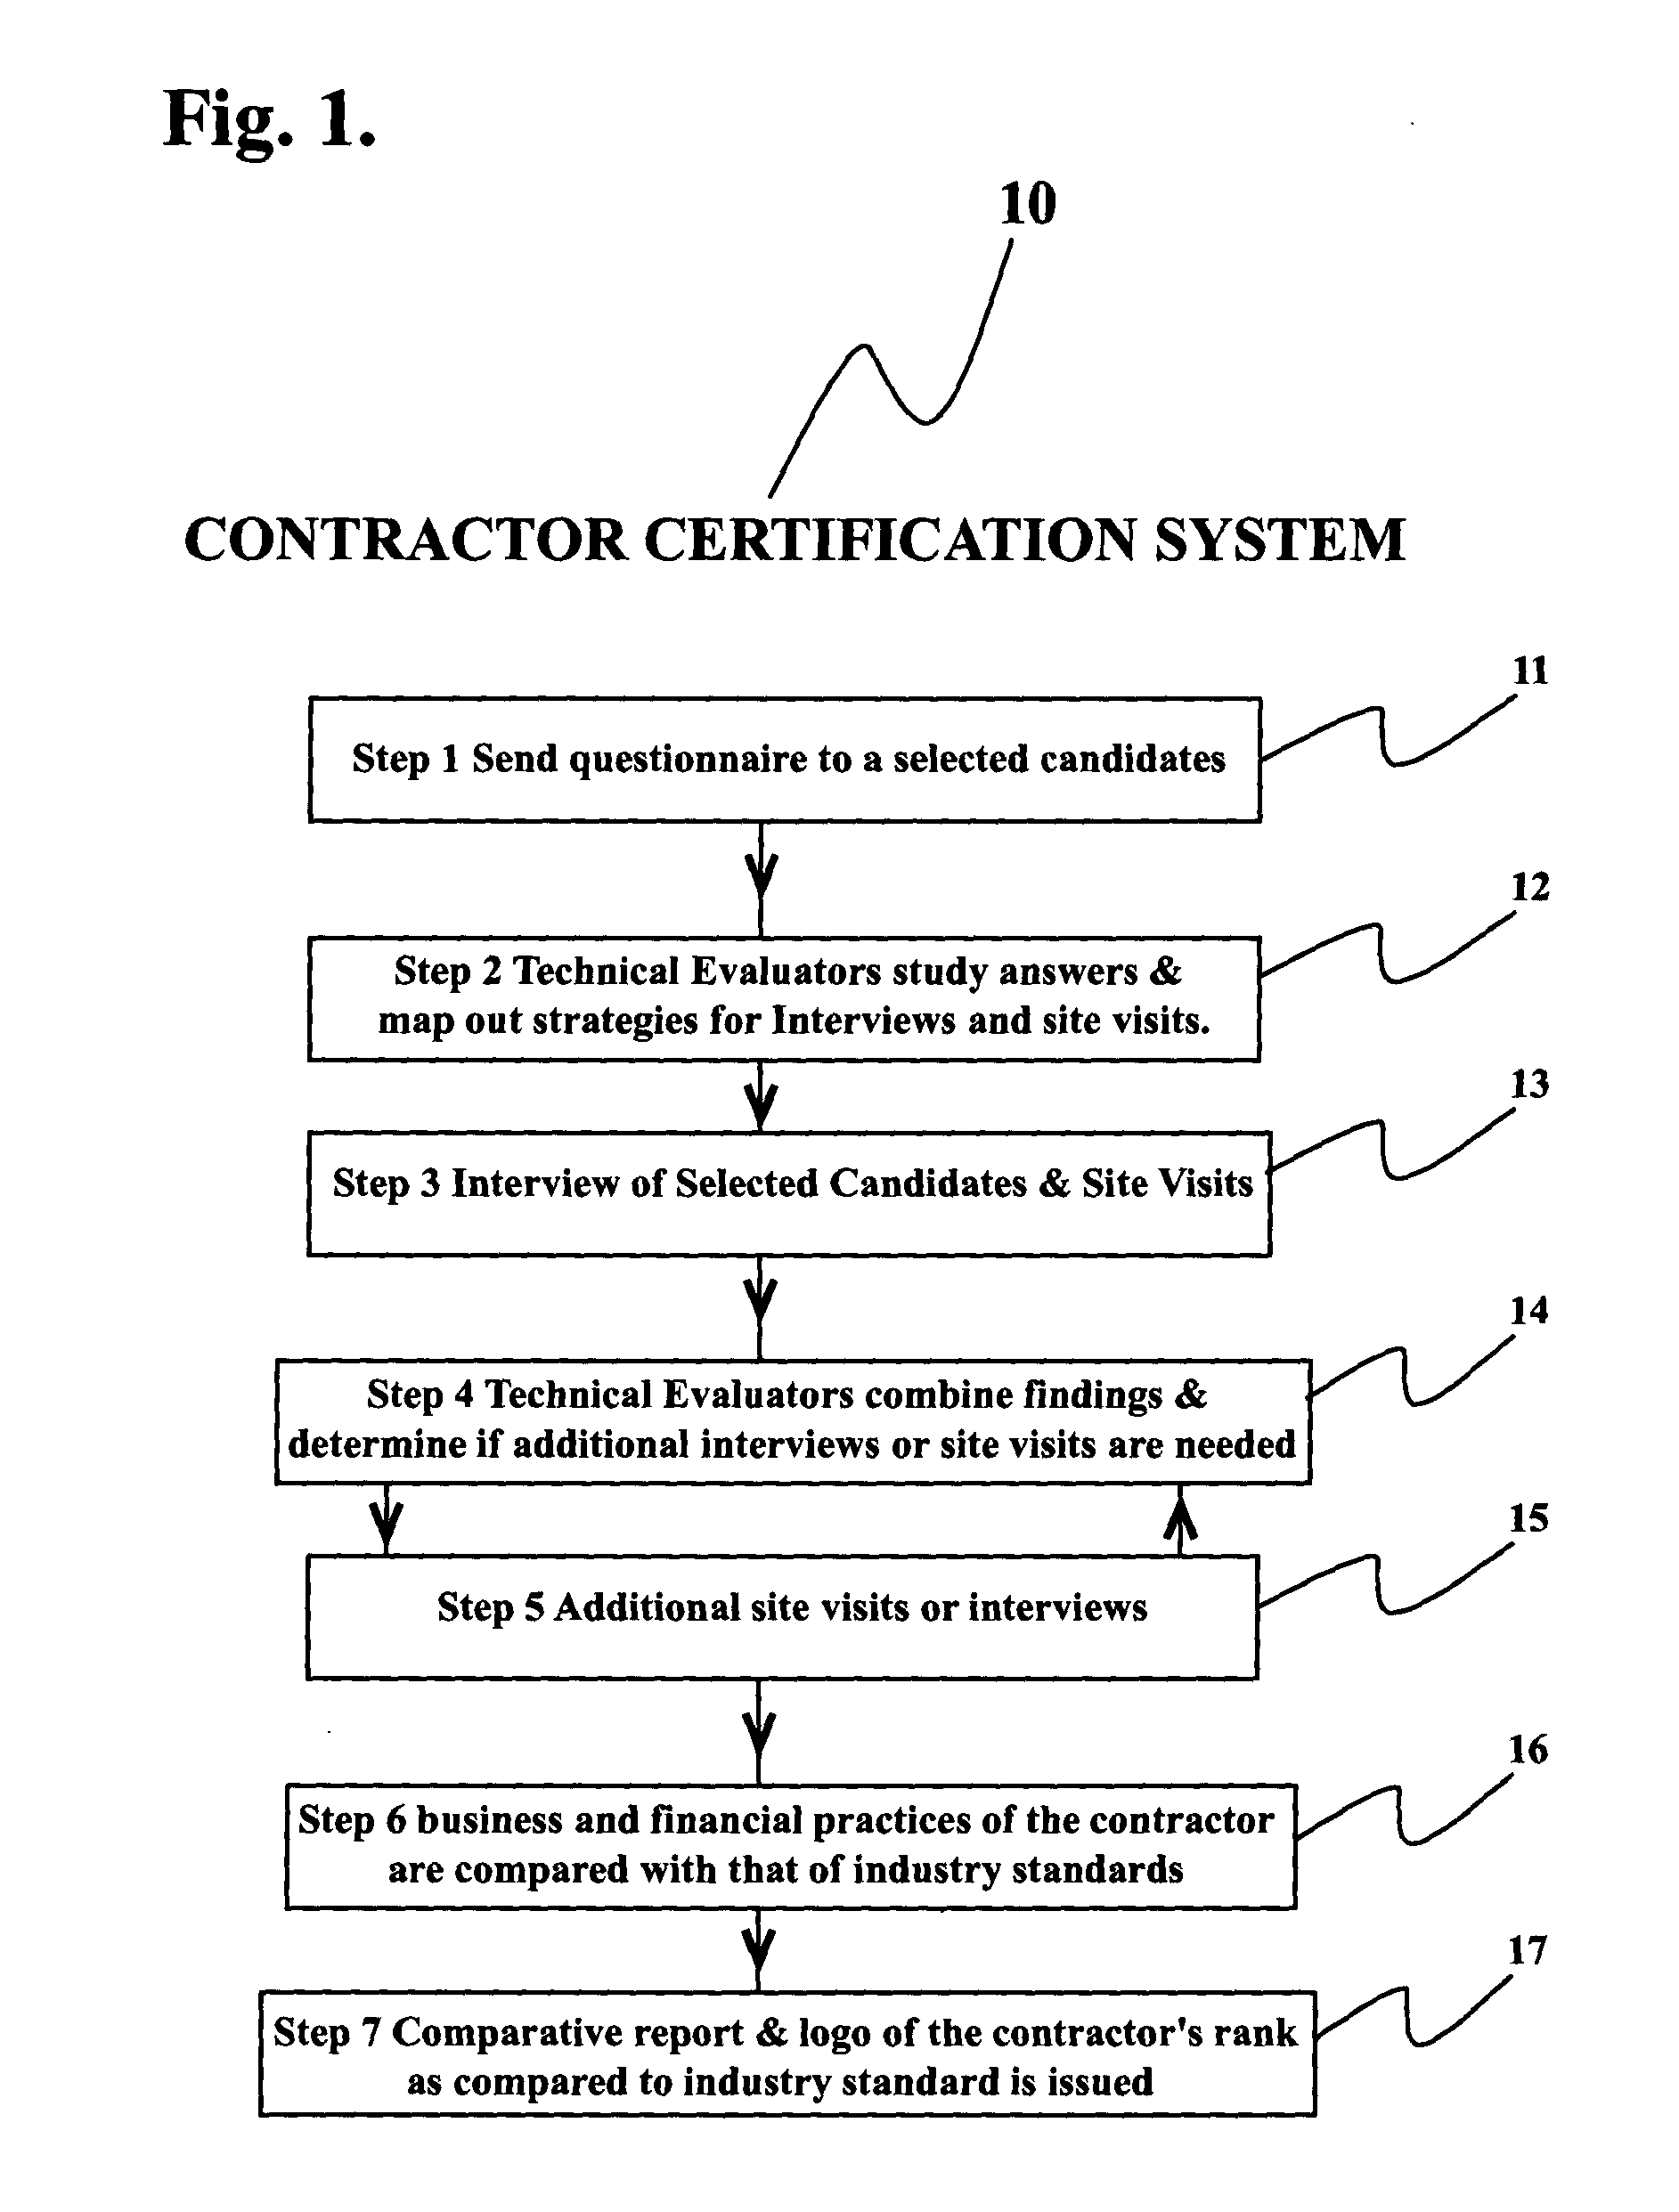 Contractor certification system